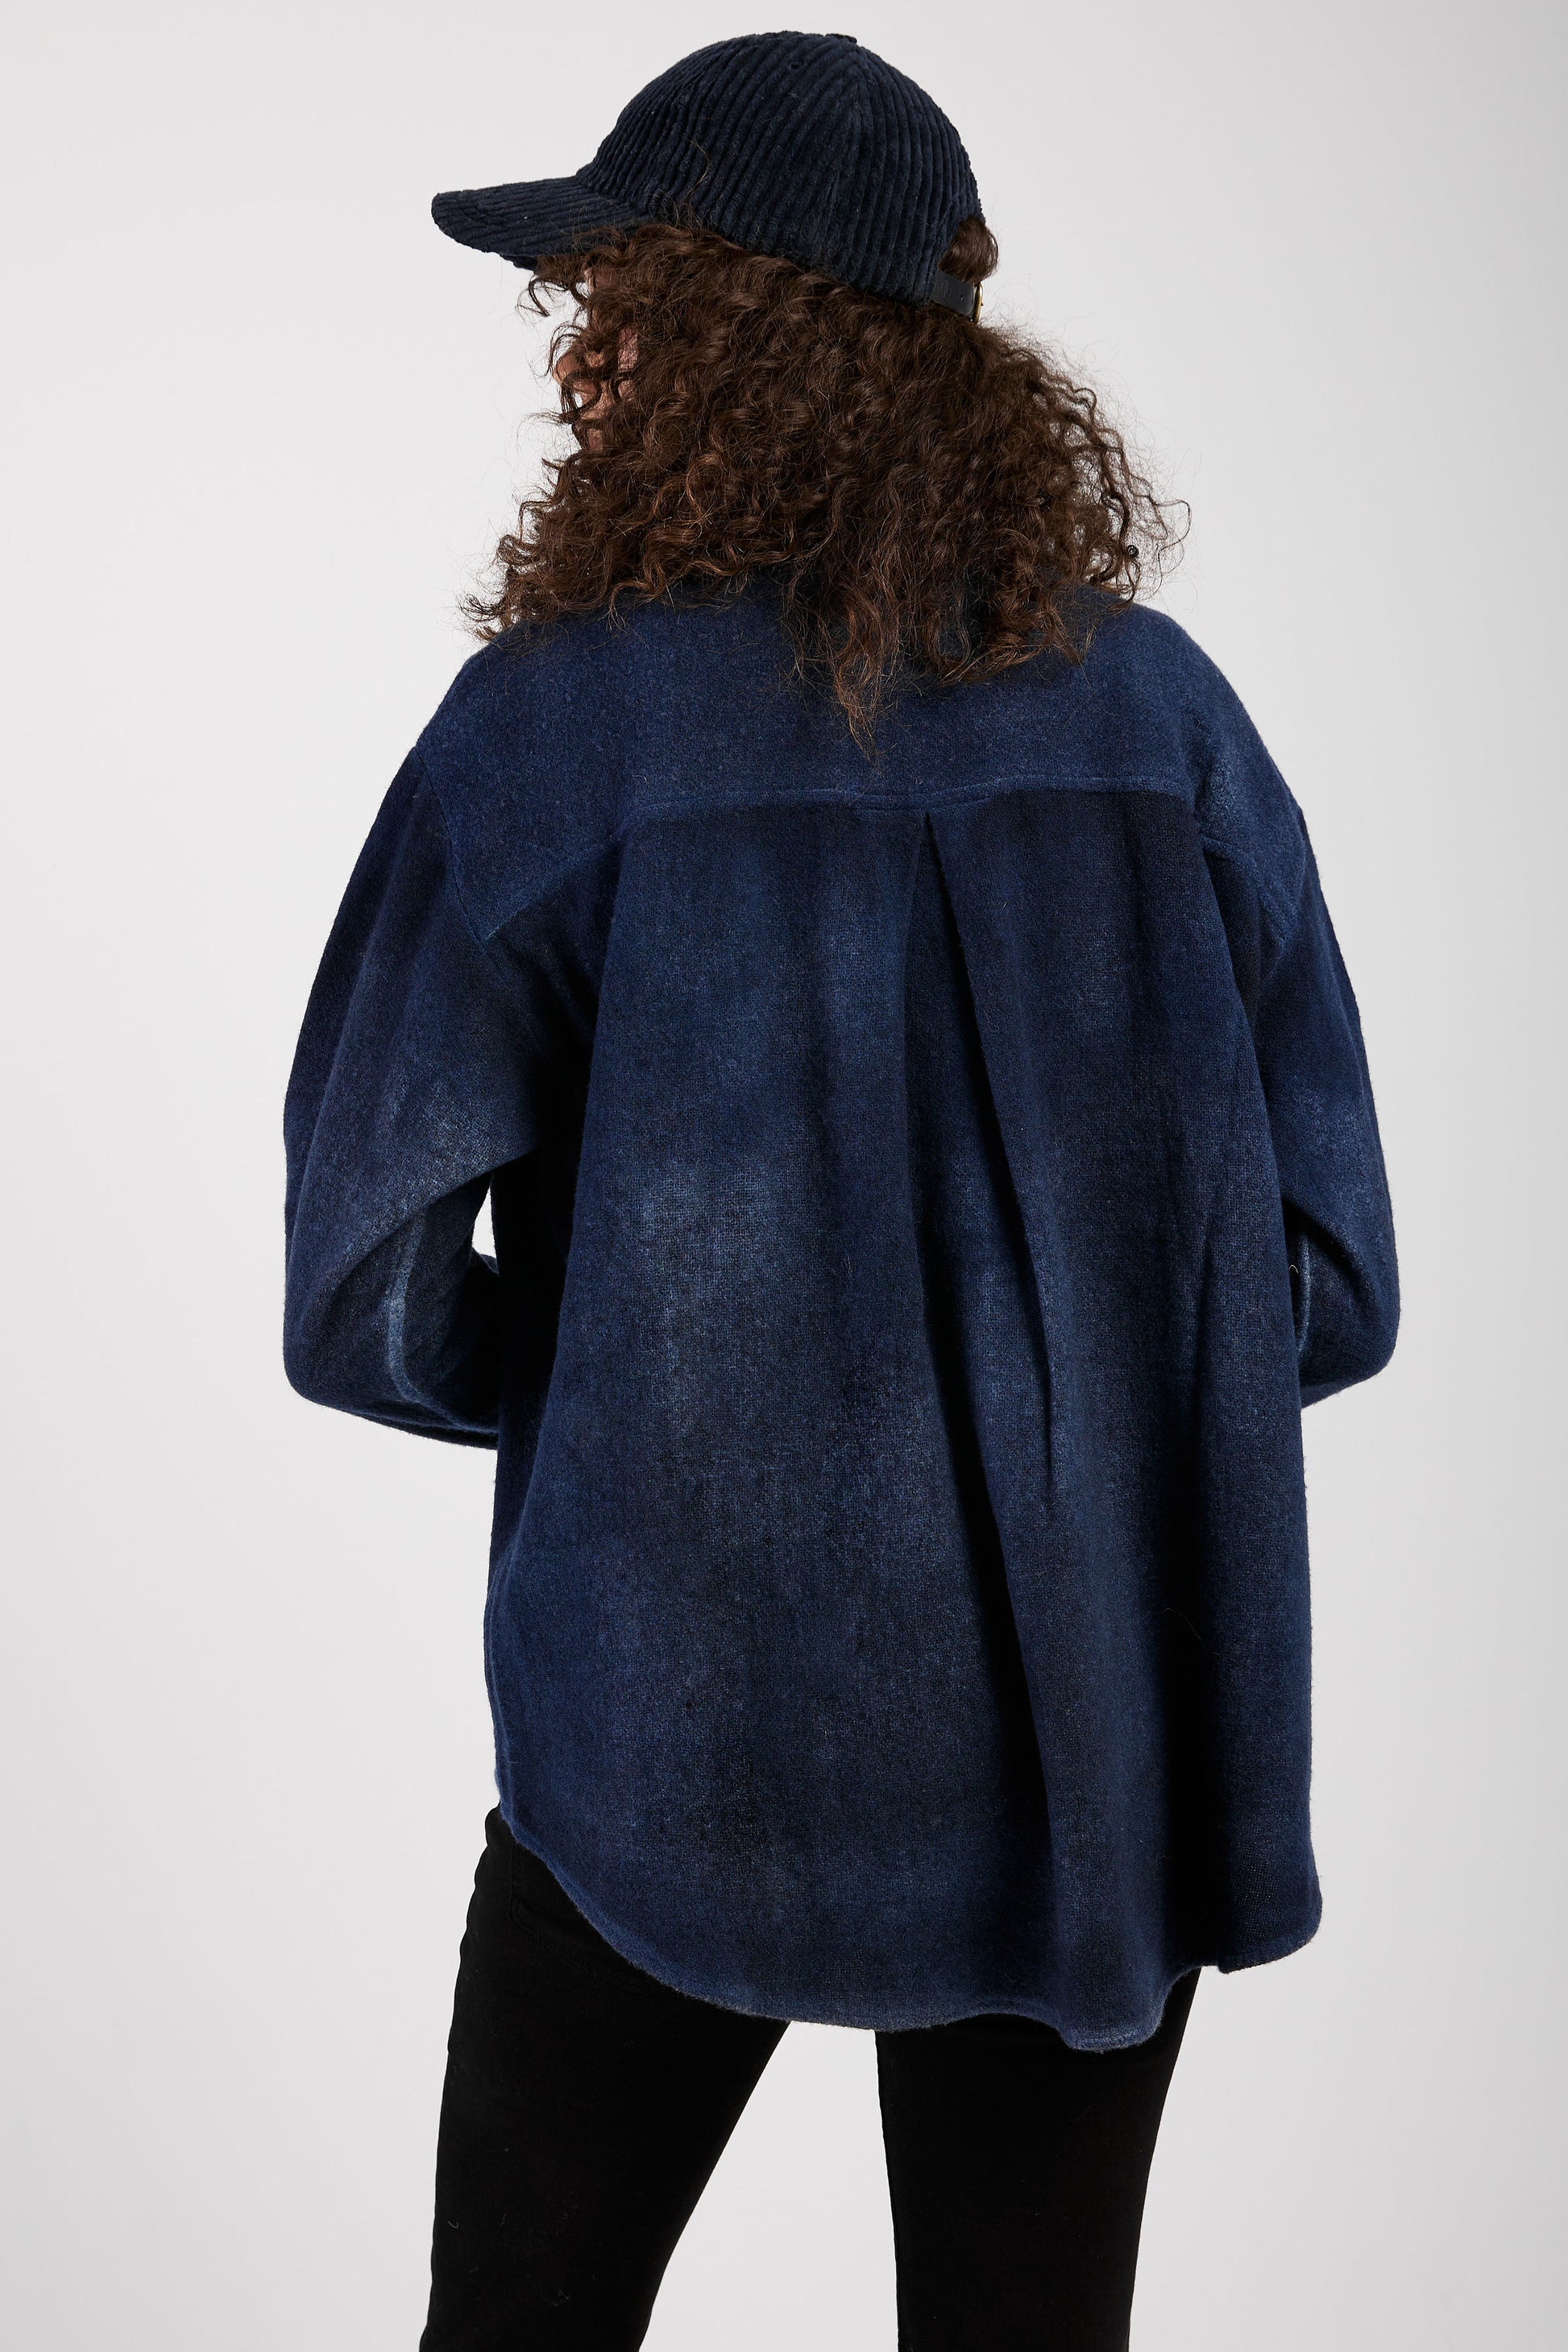 AVANT TOI Cashmere Wool Knit Shirt in Midnight